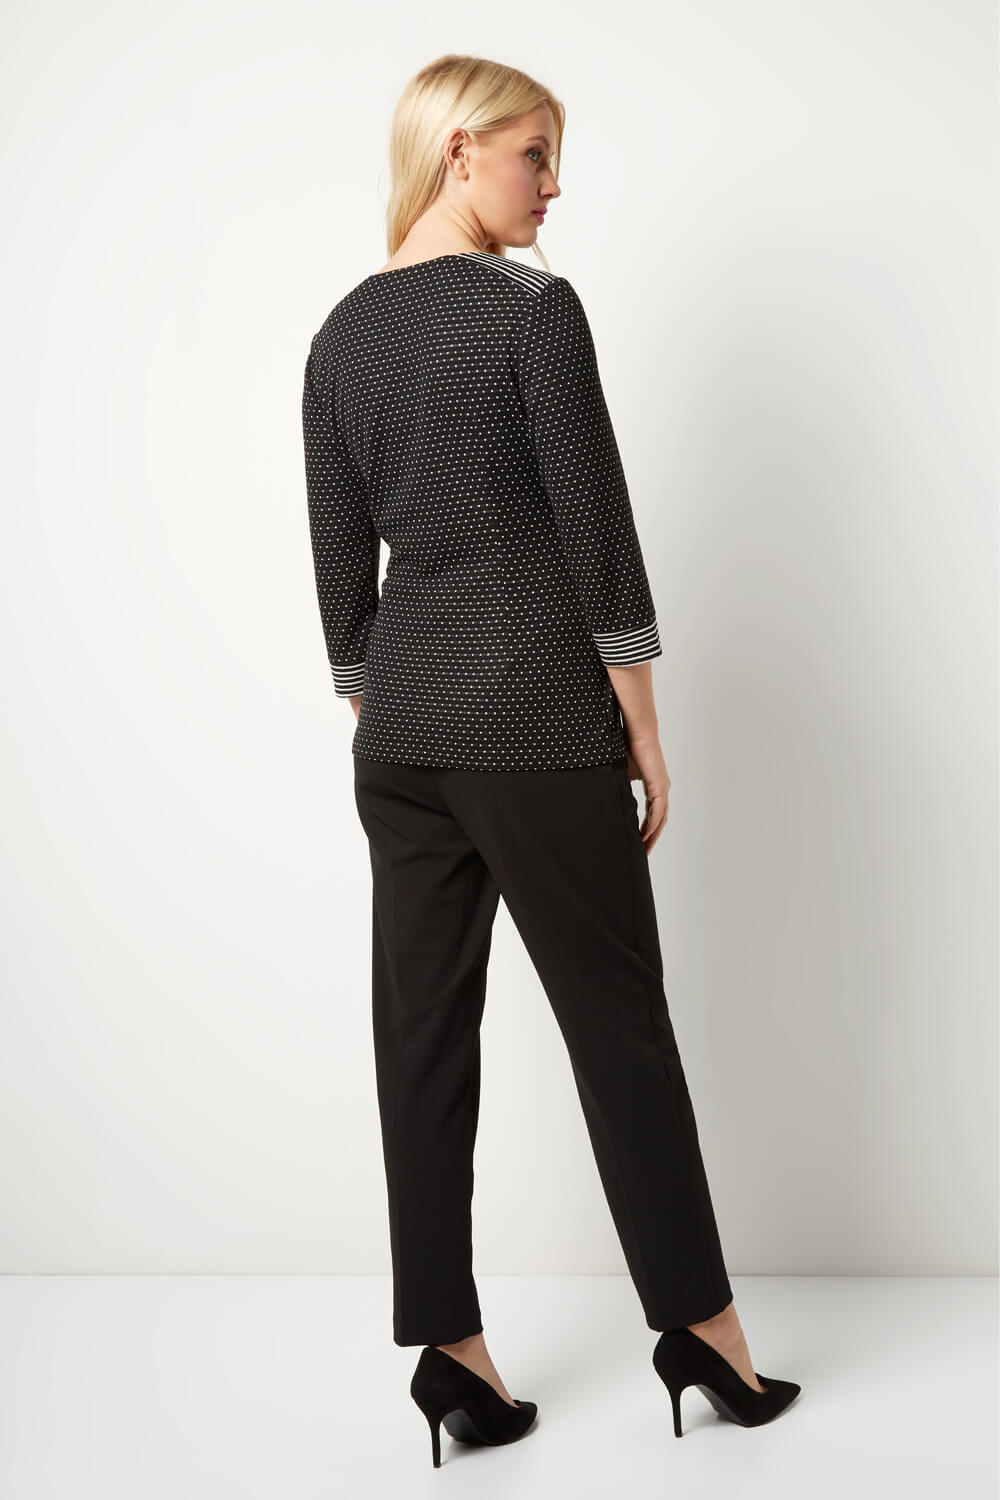 Black Contrast Spot and Stripe Zip Top, Image 2 of 4